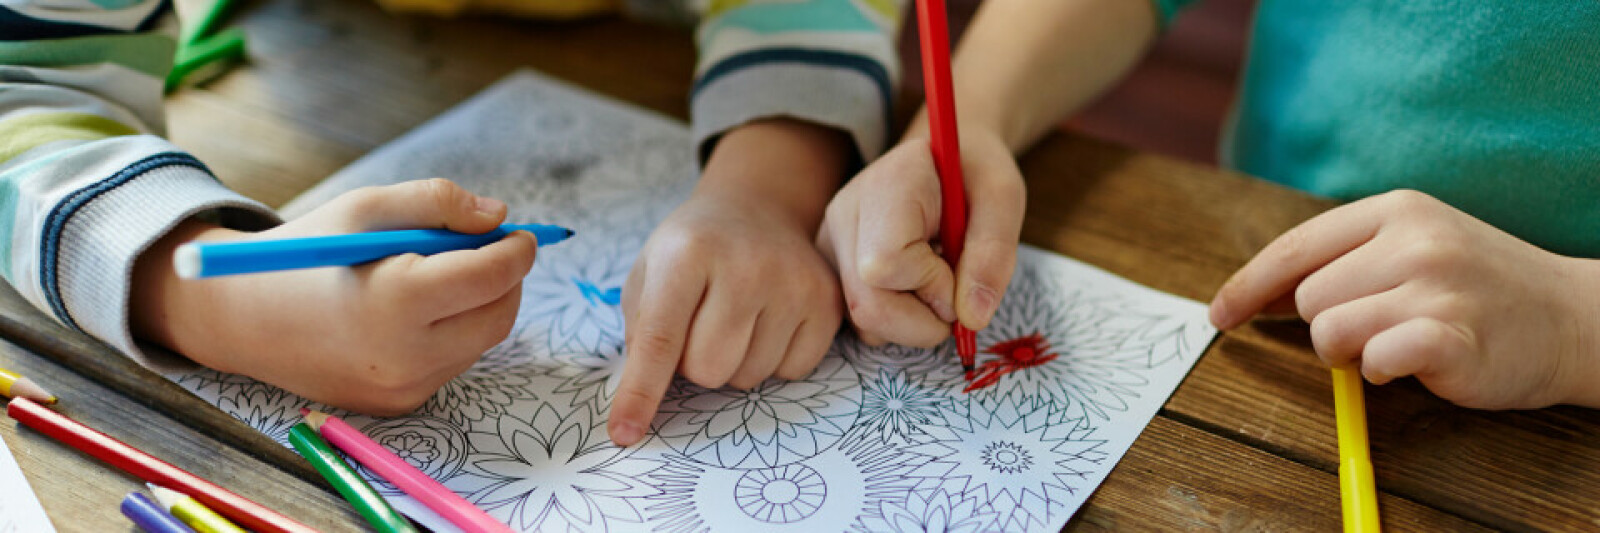 Image of children colouring pages